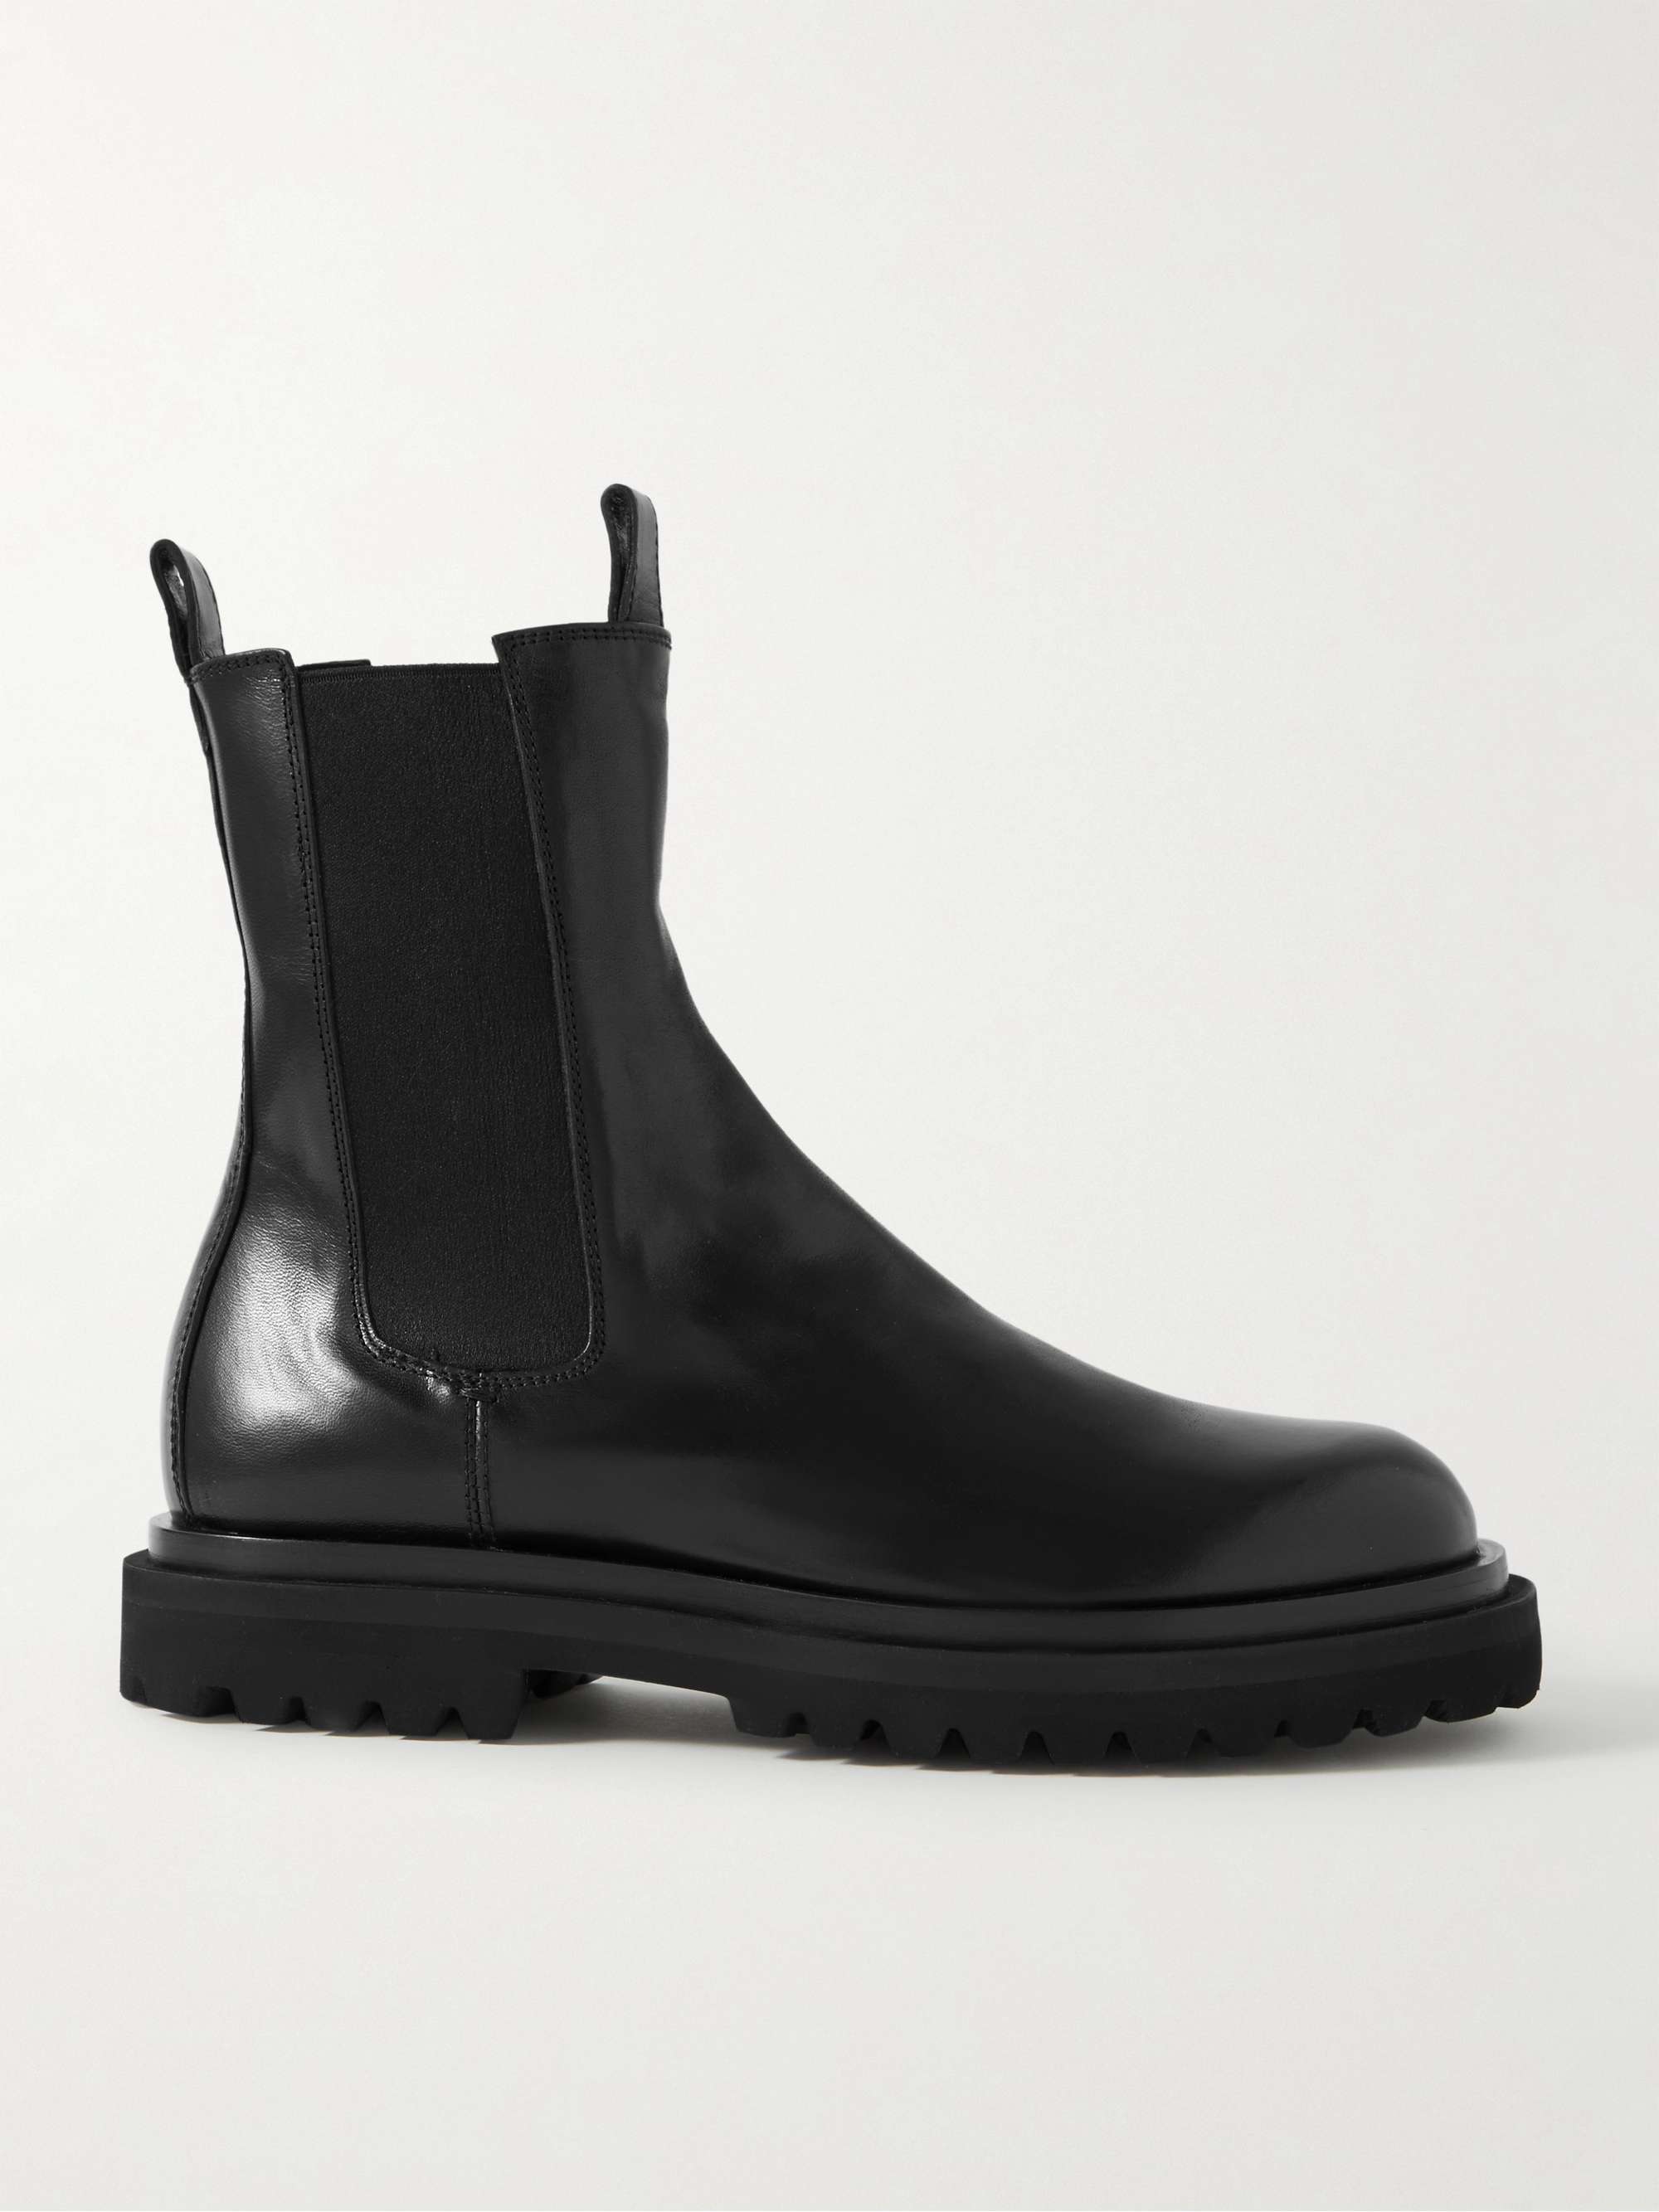 OFFICINE CREATIVE Fiore Lux Leather Chelsea Boots